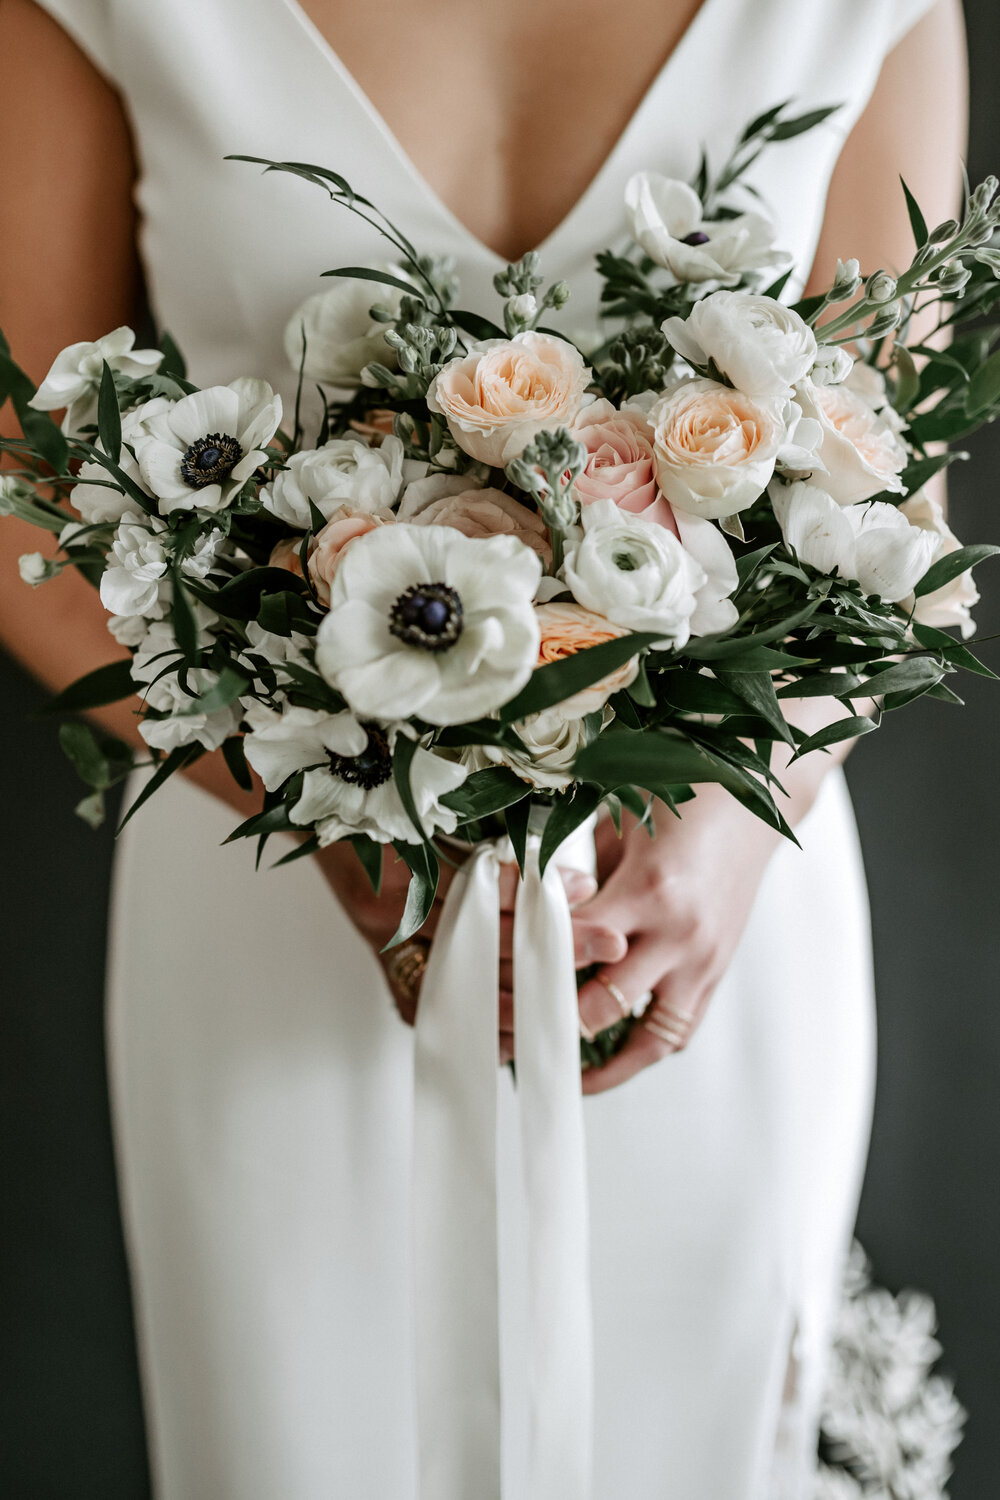 The white anemone is such a pretty flower, and its dark centre adds drama to this otherwise soft bridal bouquet. - Floral Design: Creative Edge Flowers // Planning: CNC Event Design // Photography: Grey Lily Photography // Venue: Studio 1130 // Rentals: Modern Rentals / Great Events Rentals // Gown: Blush & Raven // Hair: Hair Design by Jess // Makeup: Christina Polischuk // Cake Artistry: Modern Bake // Jewellery: au+c fine jewelry // Stationary: The Social Page Design Studio